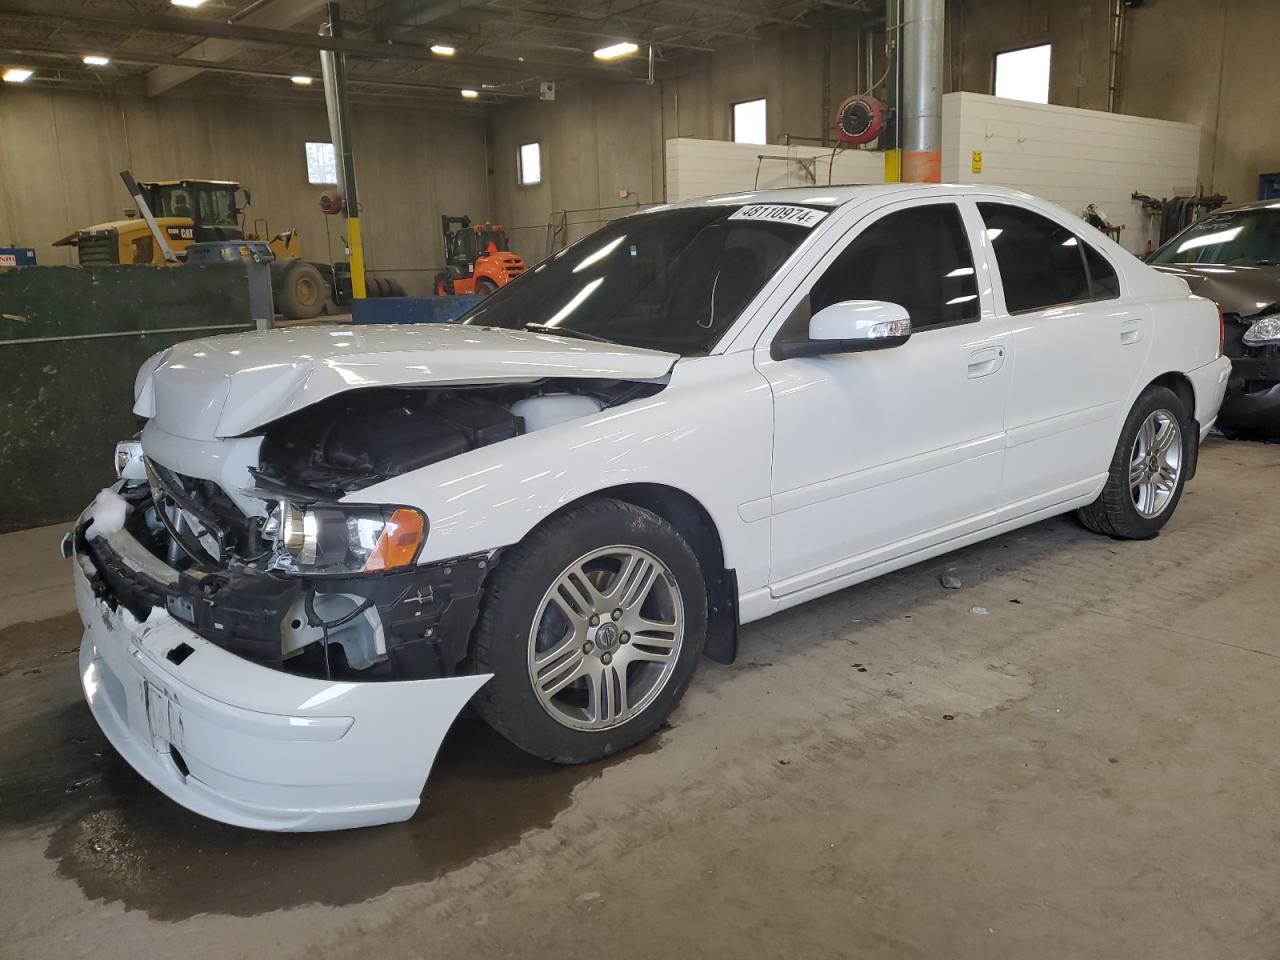 vin: YV1RS592872633163 YV1RS592872633163 2007 volvo s60 2500 for Sale in 55434 3513, Mn - Minneapolis, Blaine, USA